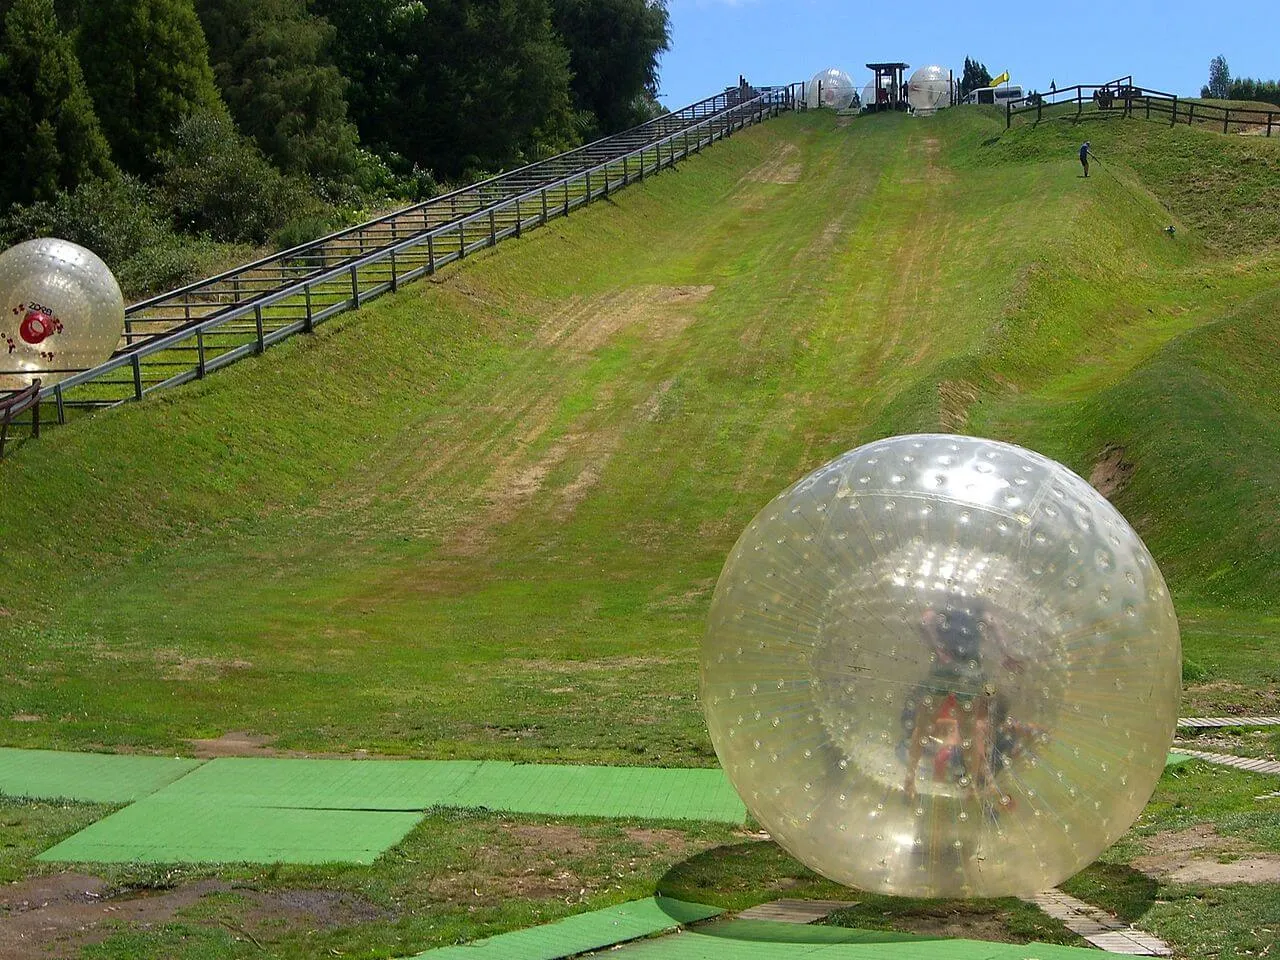 a long zorbing ball track built in India